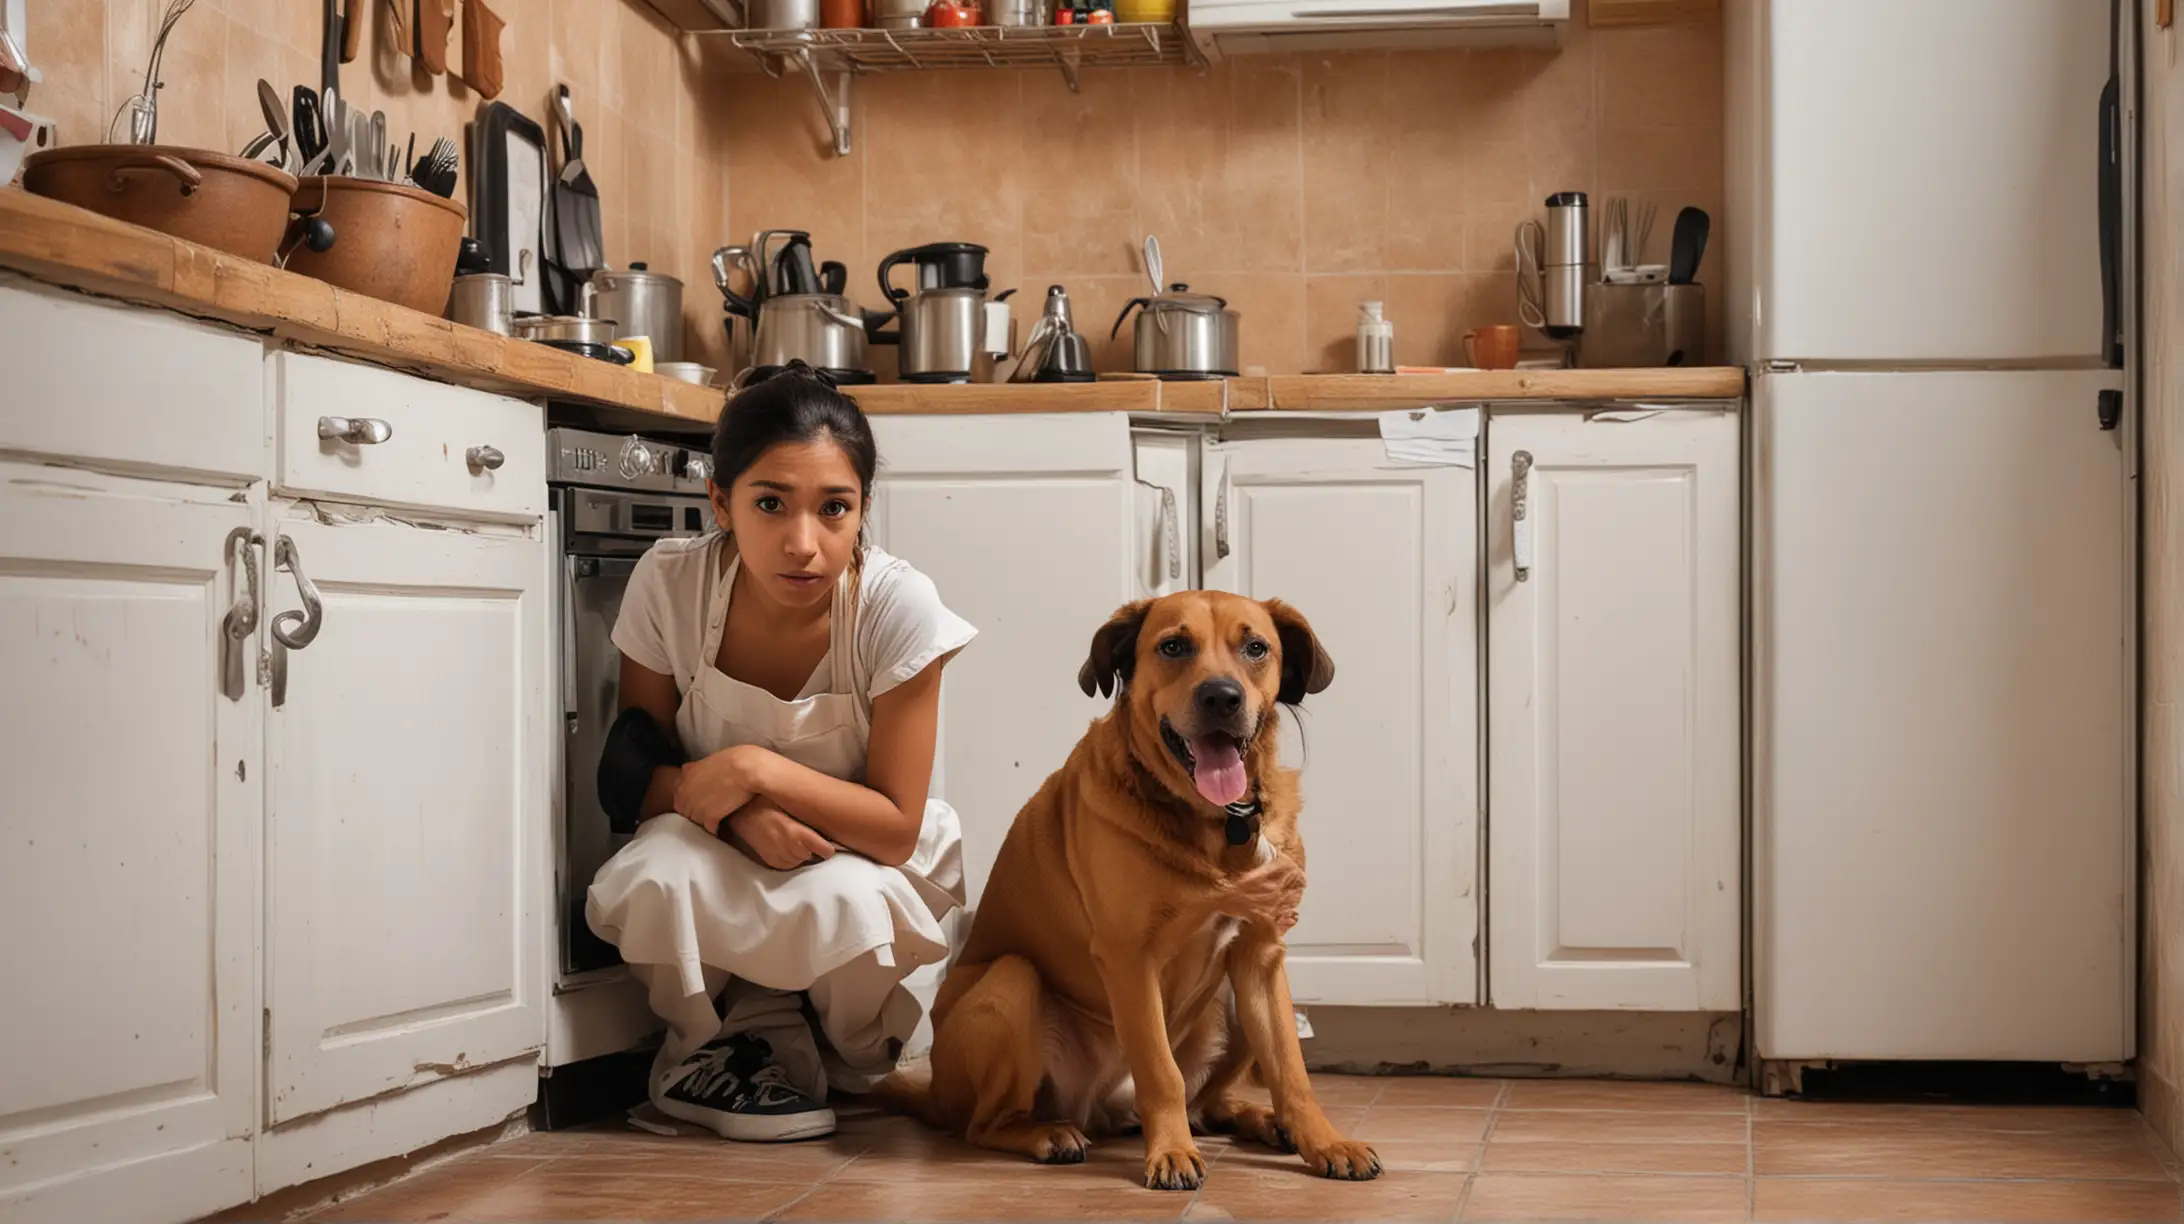 Young Mexican housekeeper is hiding in the kitchen surrounded by a dog